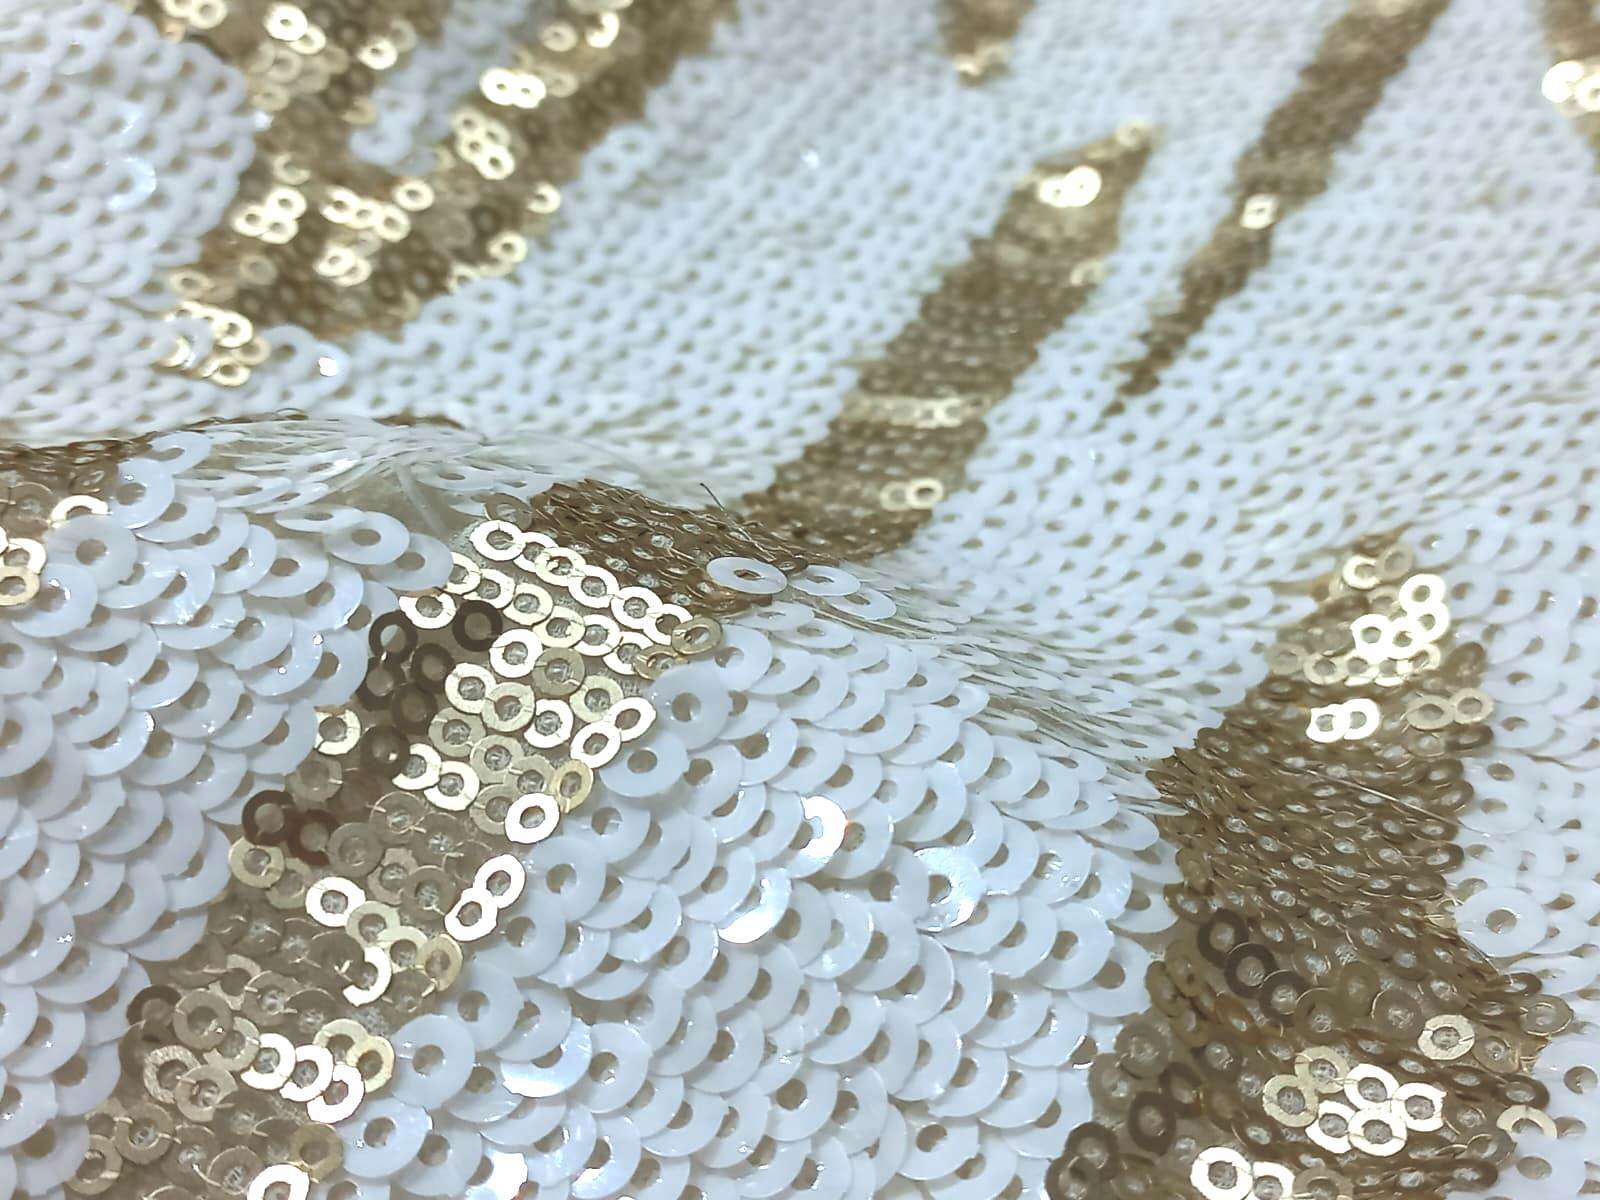 White and Gold Designer Sequins Embroidery fabric